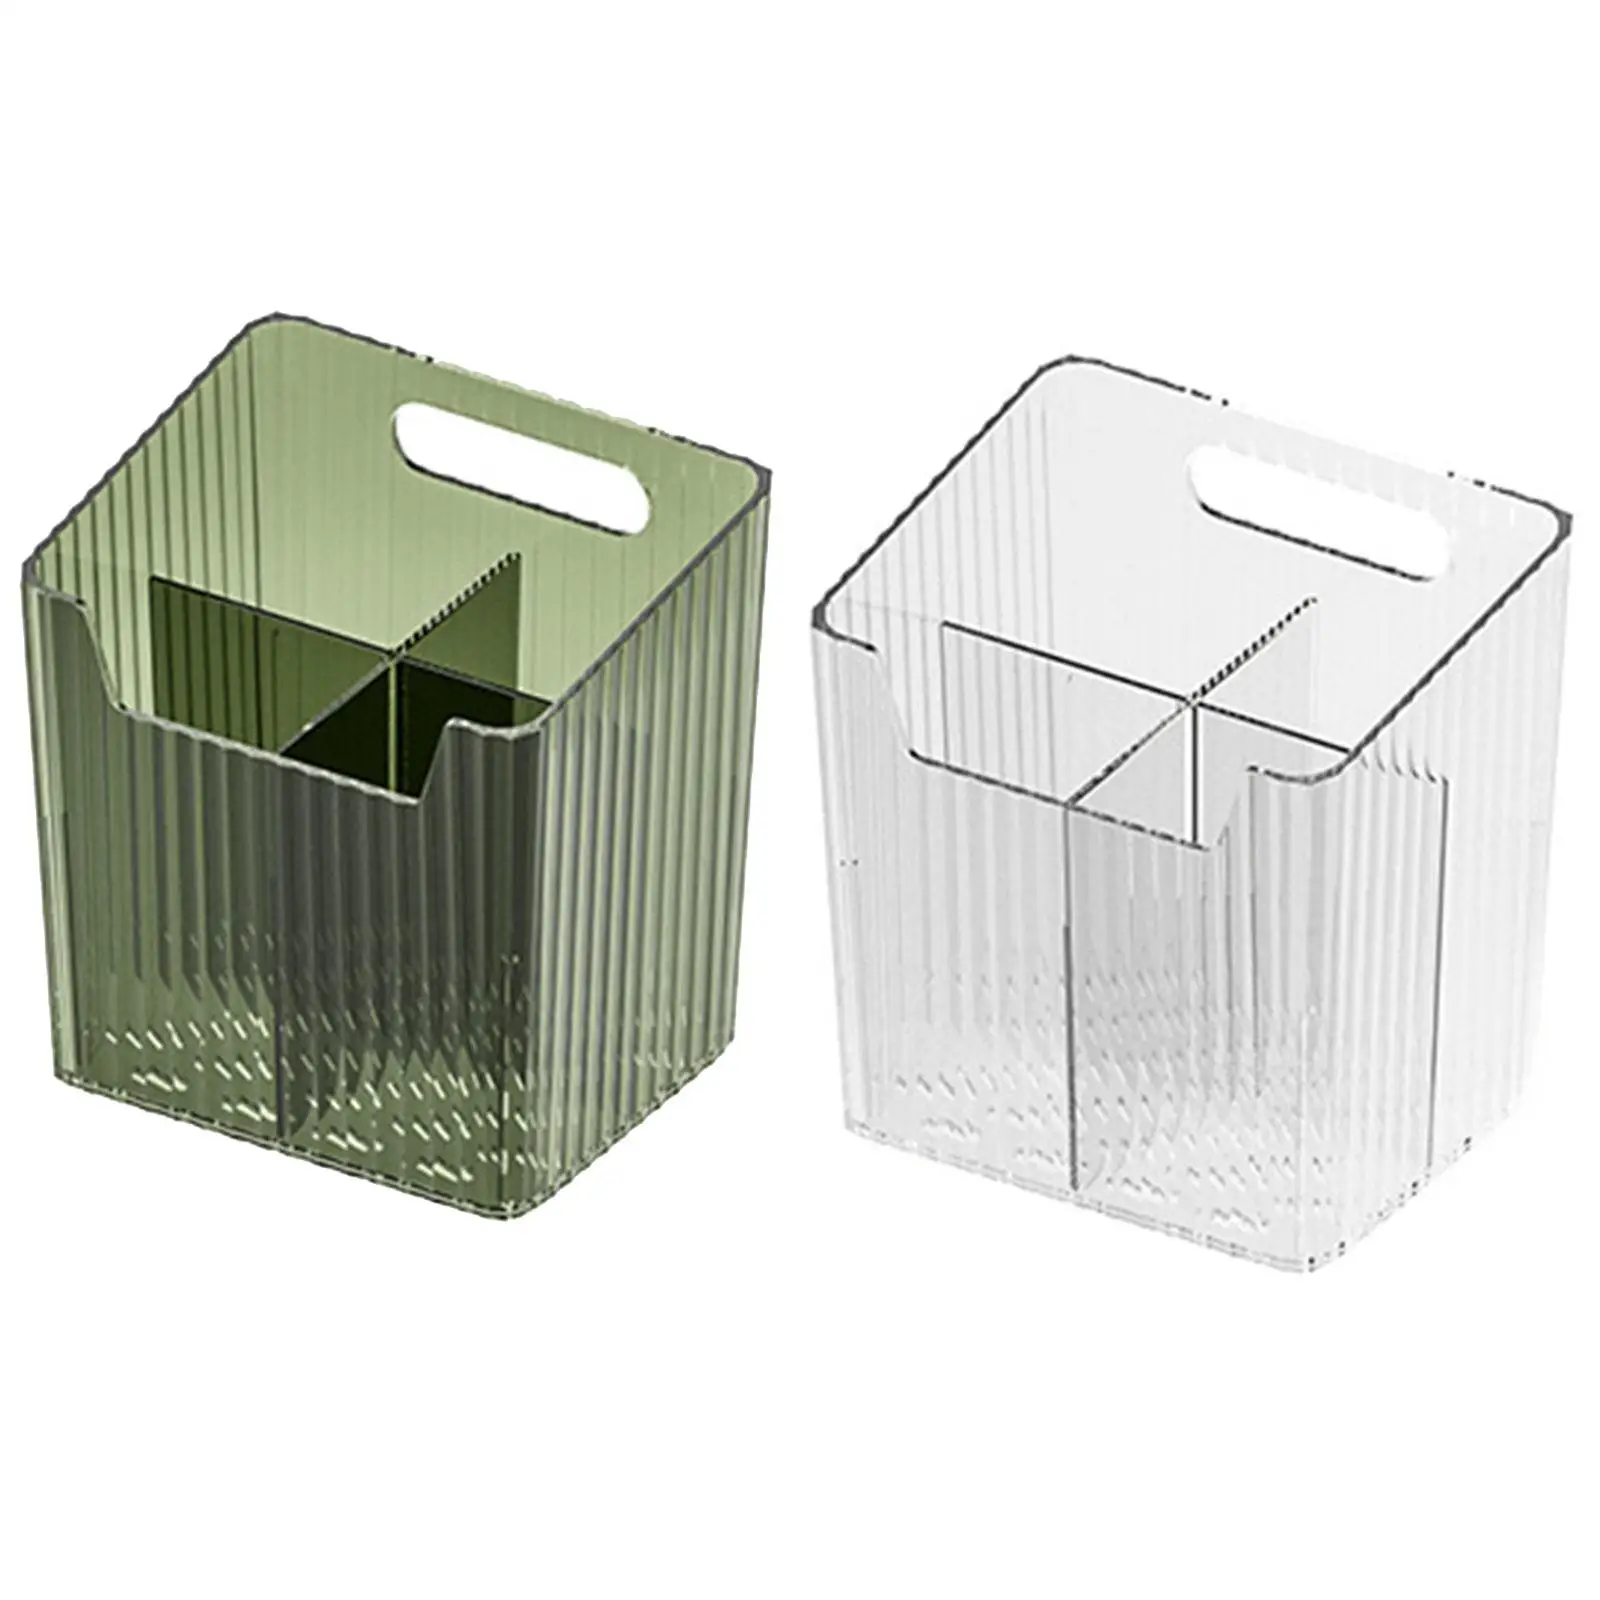 Bathroom Storage Box Divided Grid Design Durable Container Rectangular Storage Basket for Toilet Home Cosmetics Bedroom Kitchen